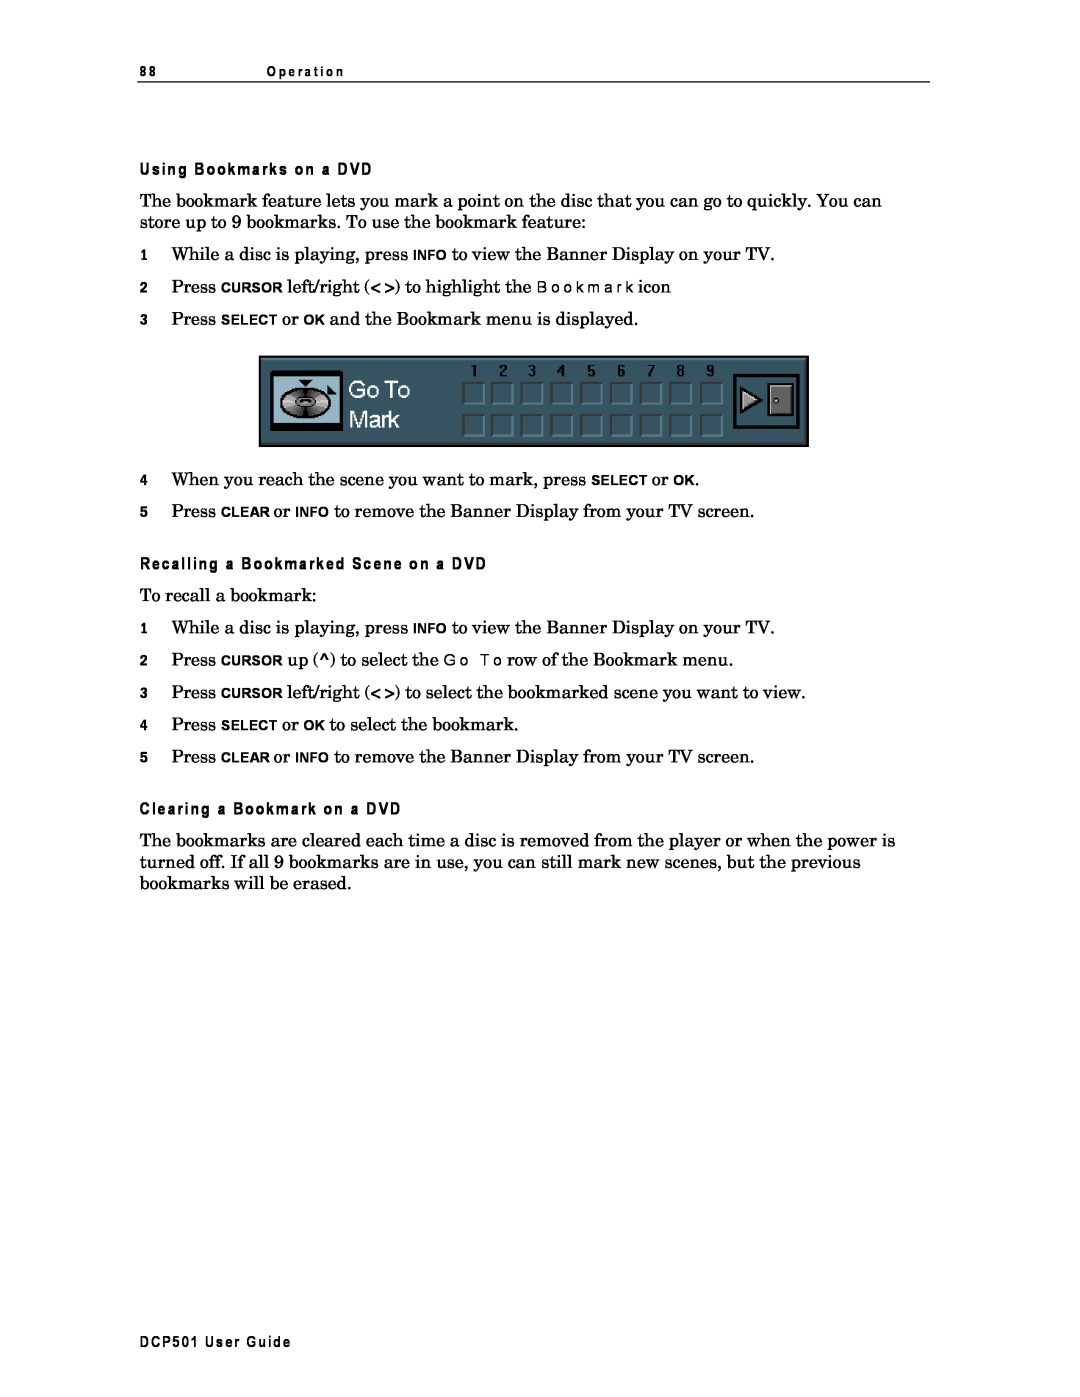 Motorola DCP501 manual Using Bookmarks on a DVD, Recalling a Bookmarked Scene on a DVD, Clearing a Bookmark on a DVD 